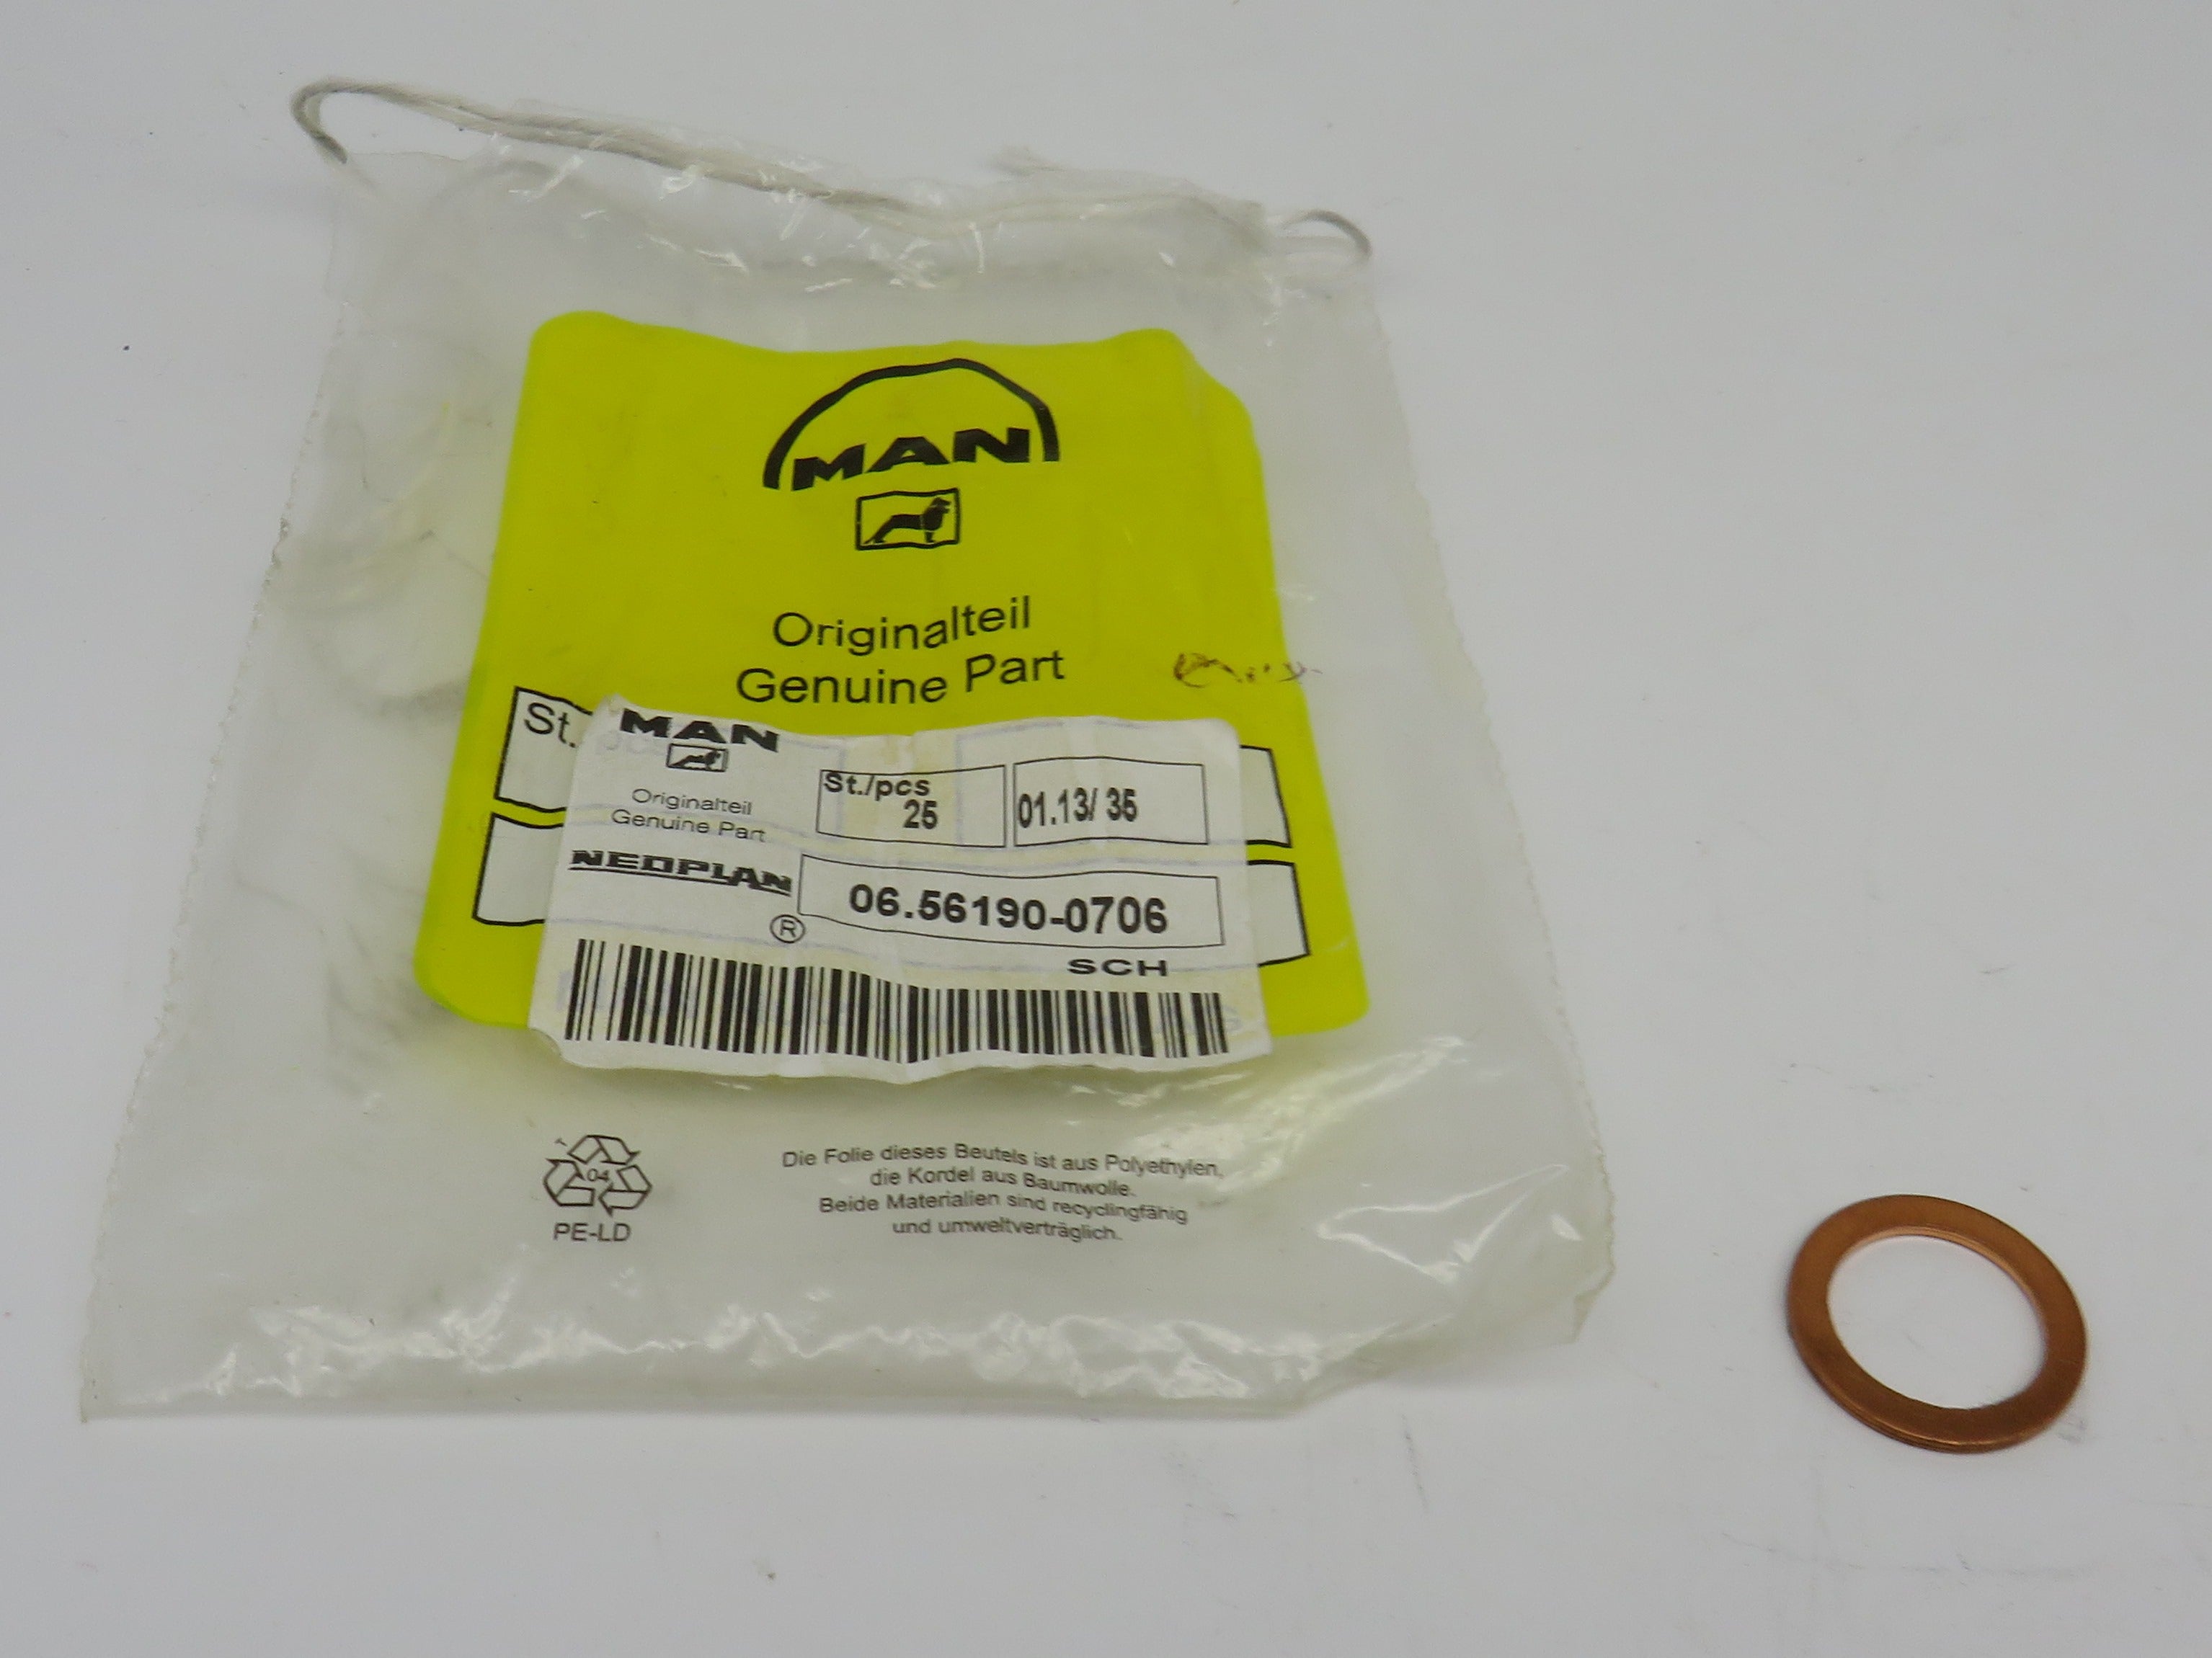 6-56190-0706 MAN Copper Crush Washer14mm x 20mm For Screw/Rod on Filter